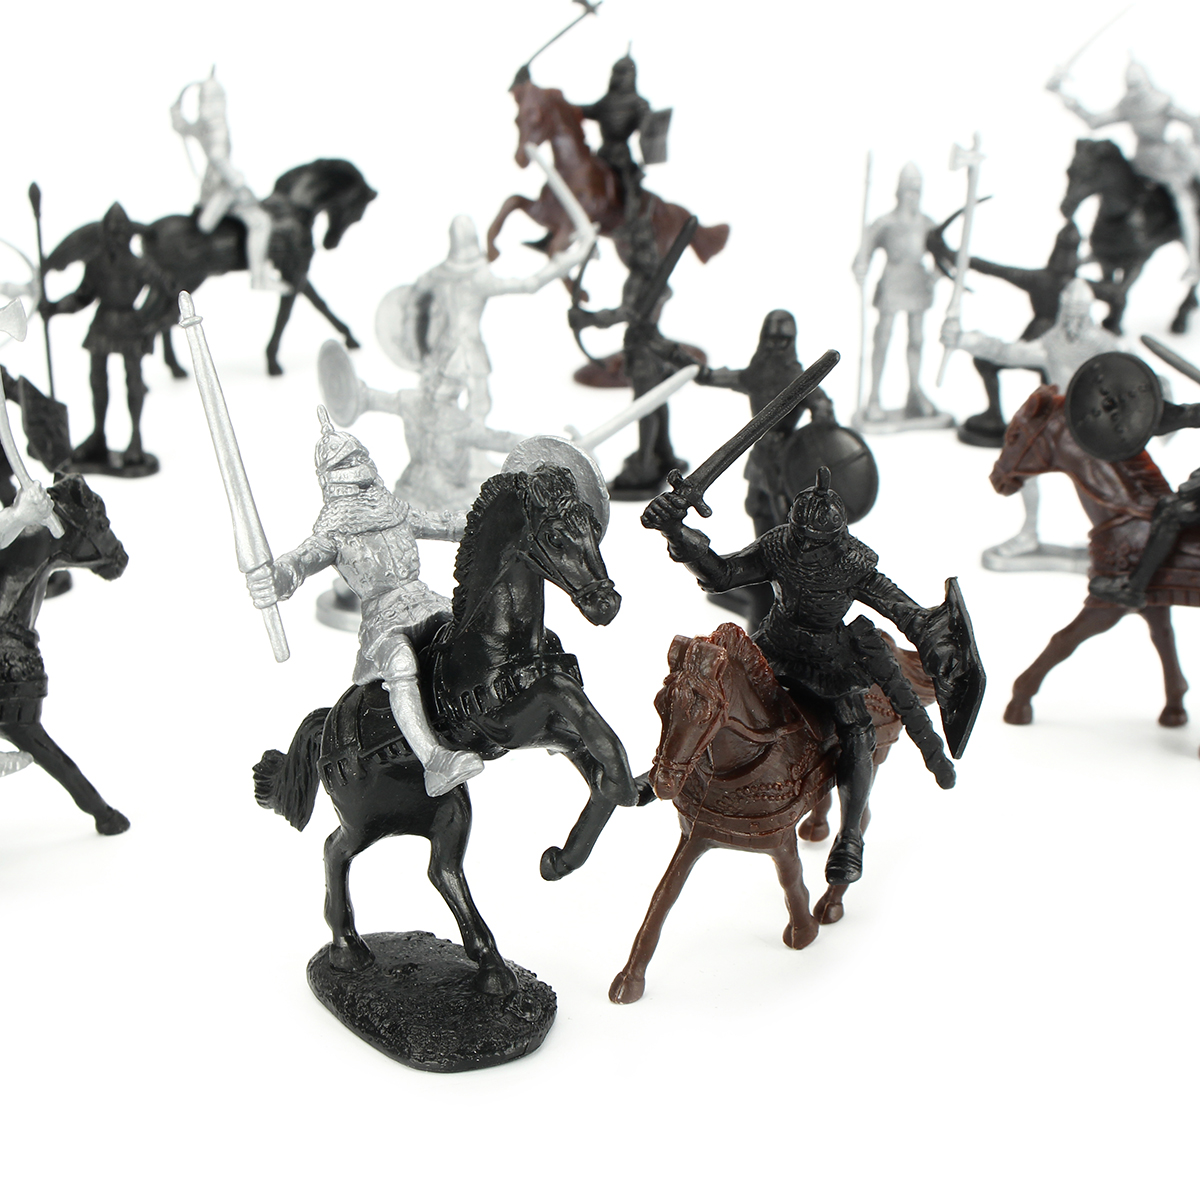 28pcs Medieval Knights Warriors Horses Soldiers Action Figures Mode Toy Set Kids 